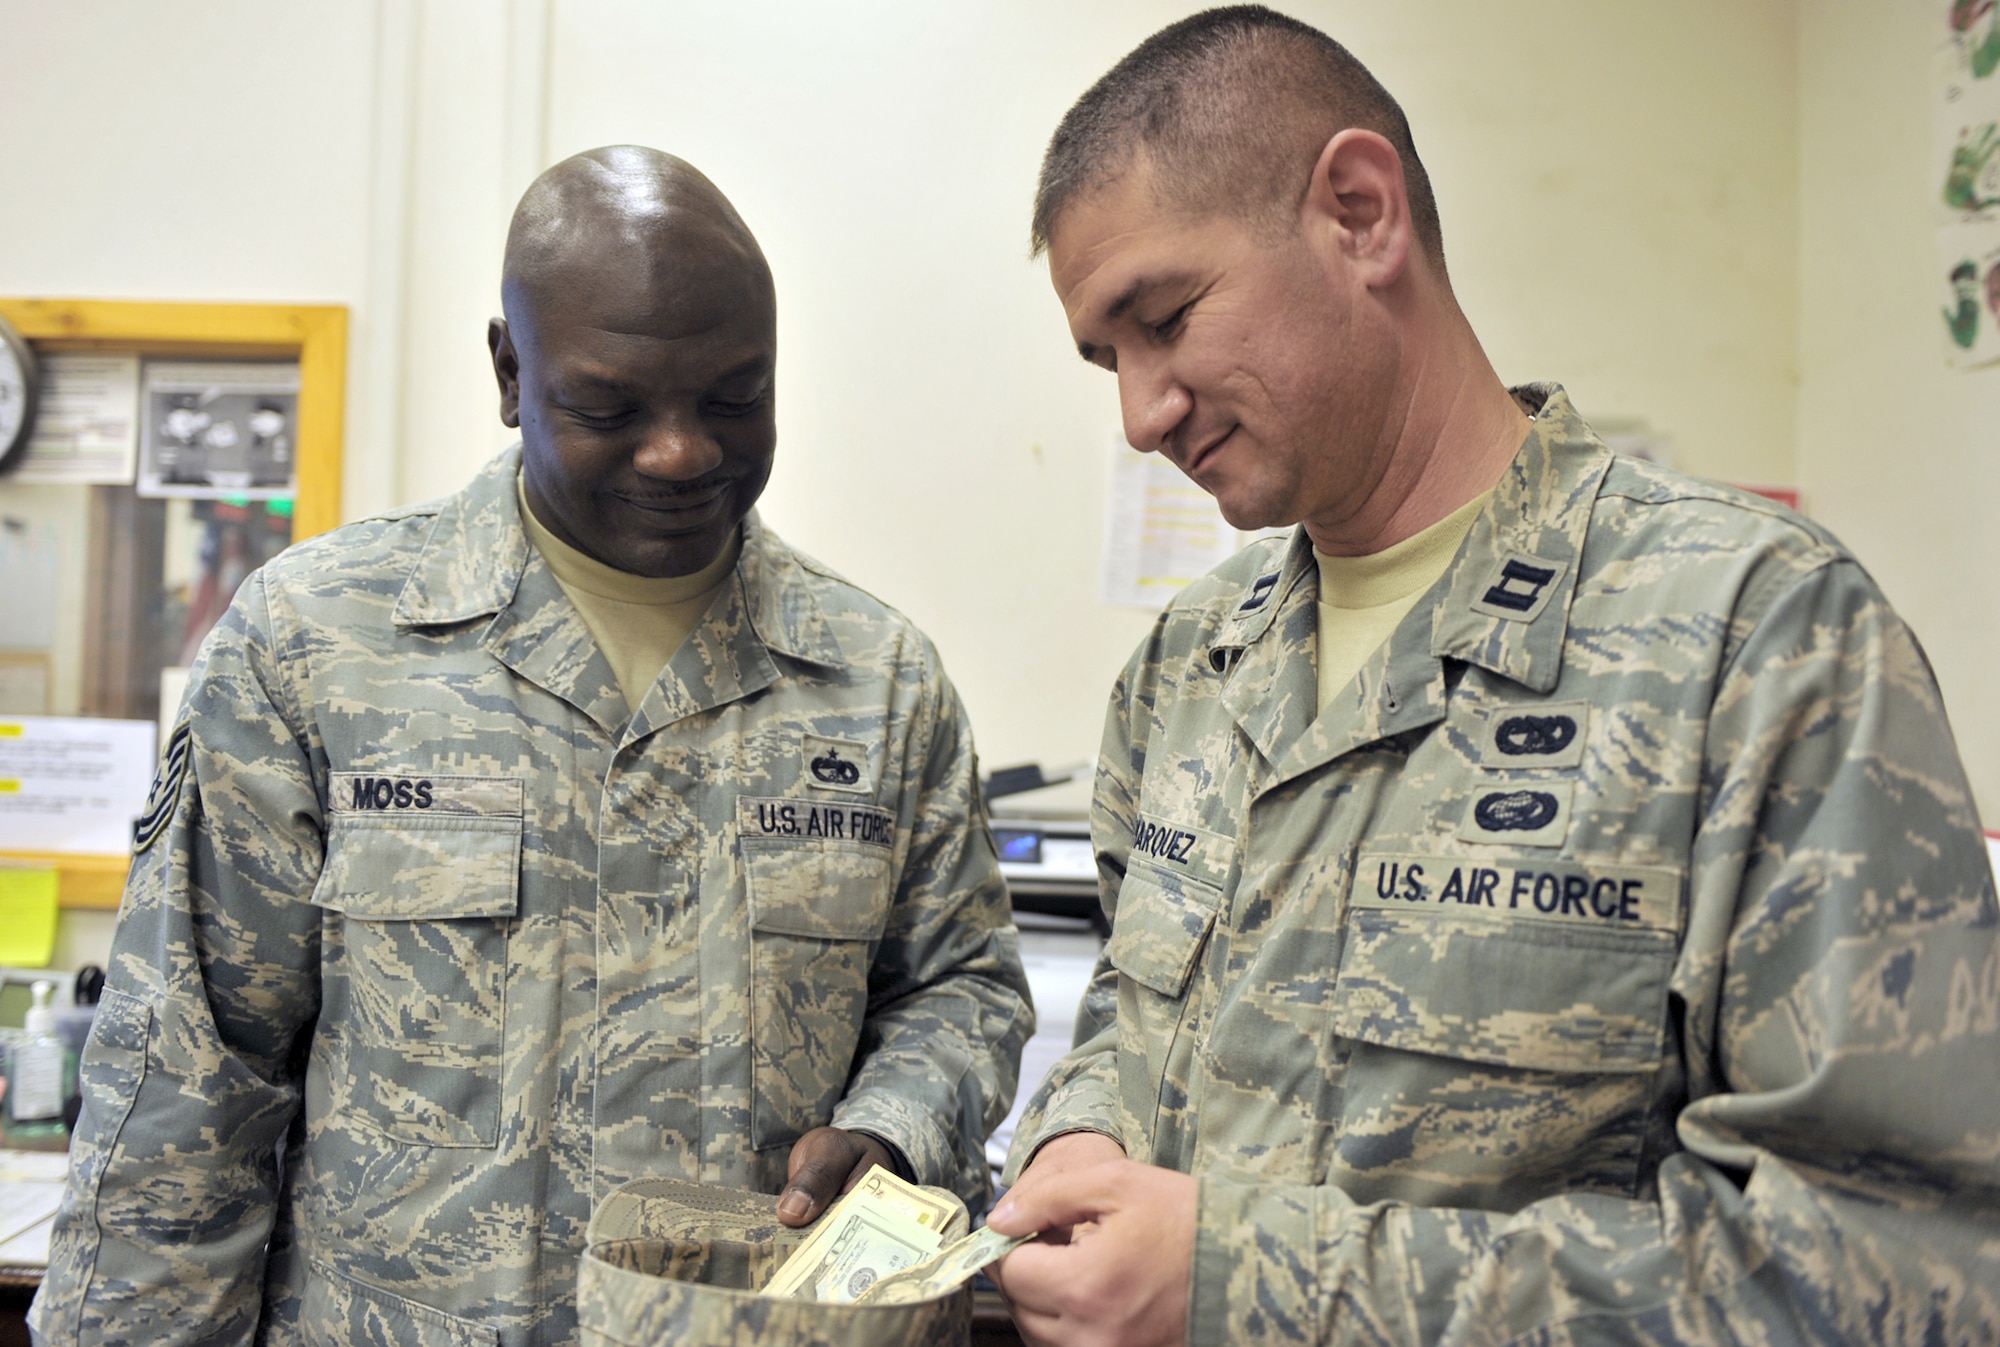 Tech. Sgt. Ladell Moss collects money from Capt. Charles Marquez April 14, 2011, at Bagram Airfield, Afghanistan. Both Airmen are assigned to the 455th Expeditionary Aerial Port Squadron. (U.S. Air Force photo/Senior Airman Sheila deVera)